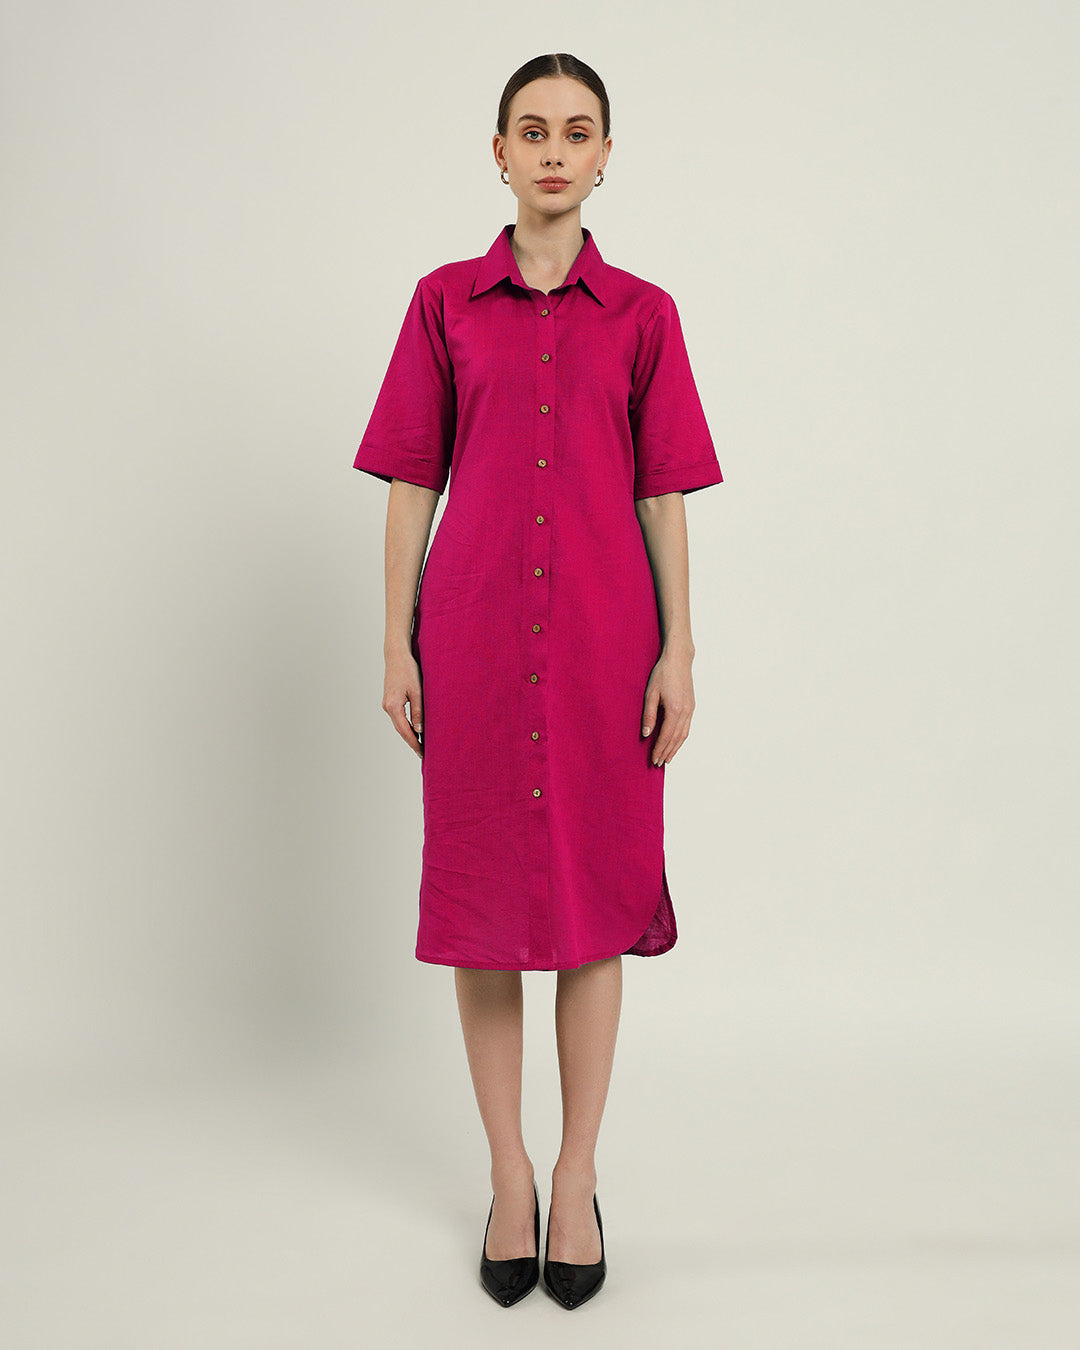 The Tampa Berry Cotton Dress